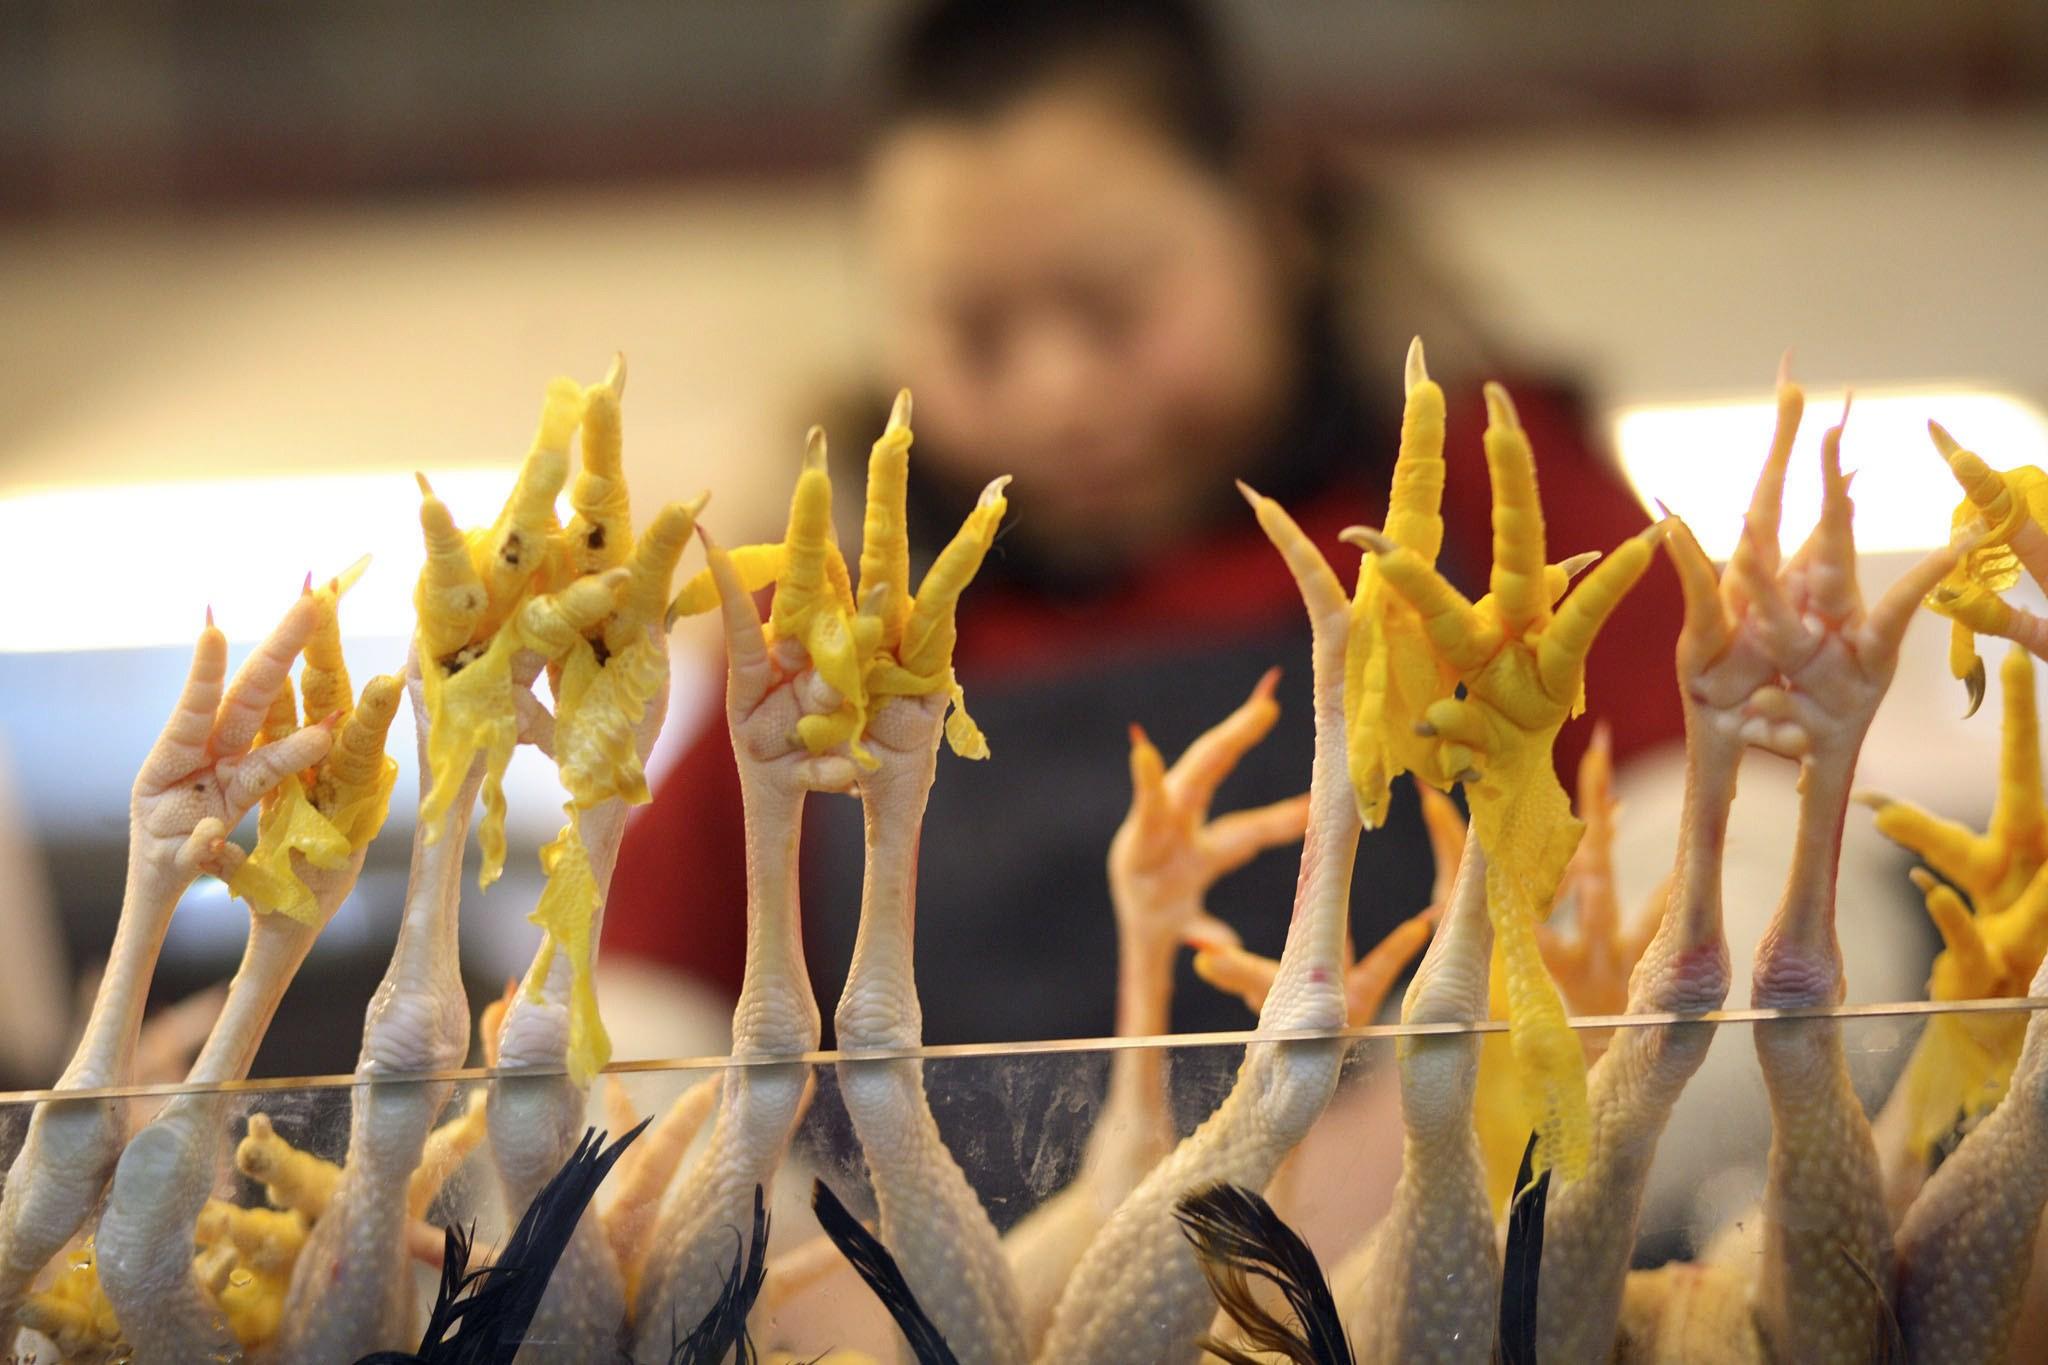 Chicken feet stick up from behind a stall glass panel at a market in Shanghai. Photo: EPA